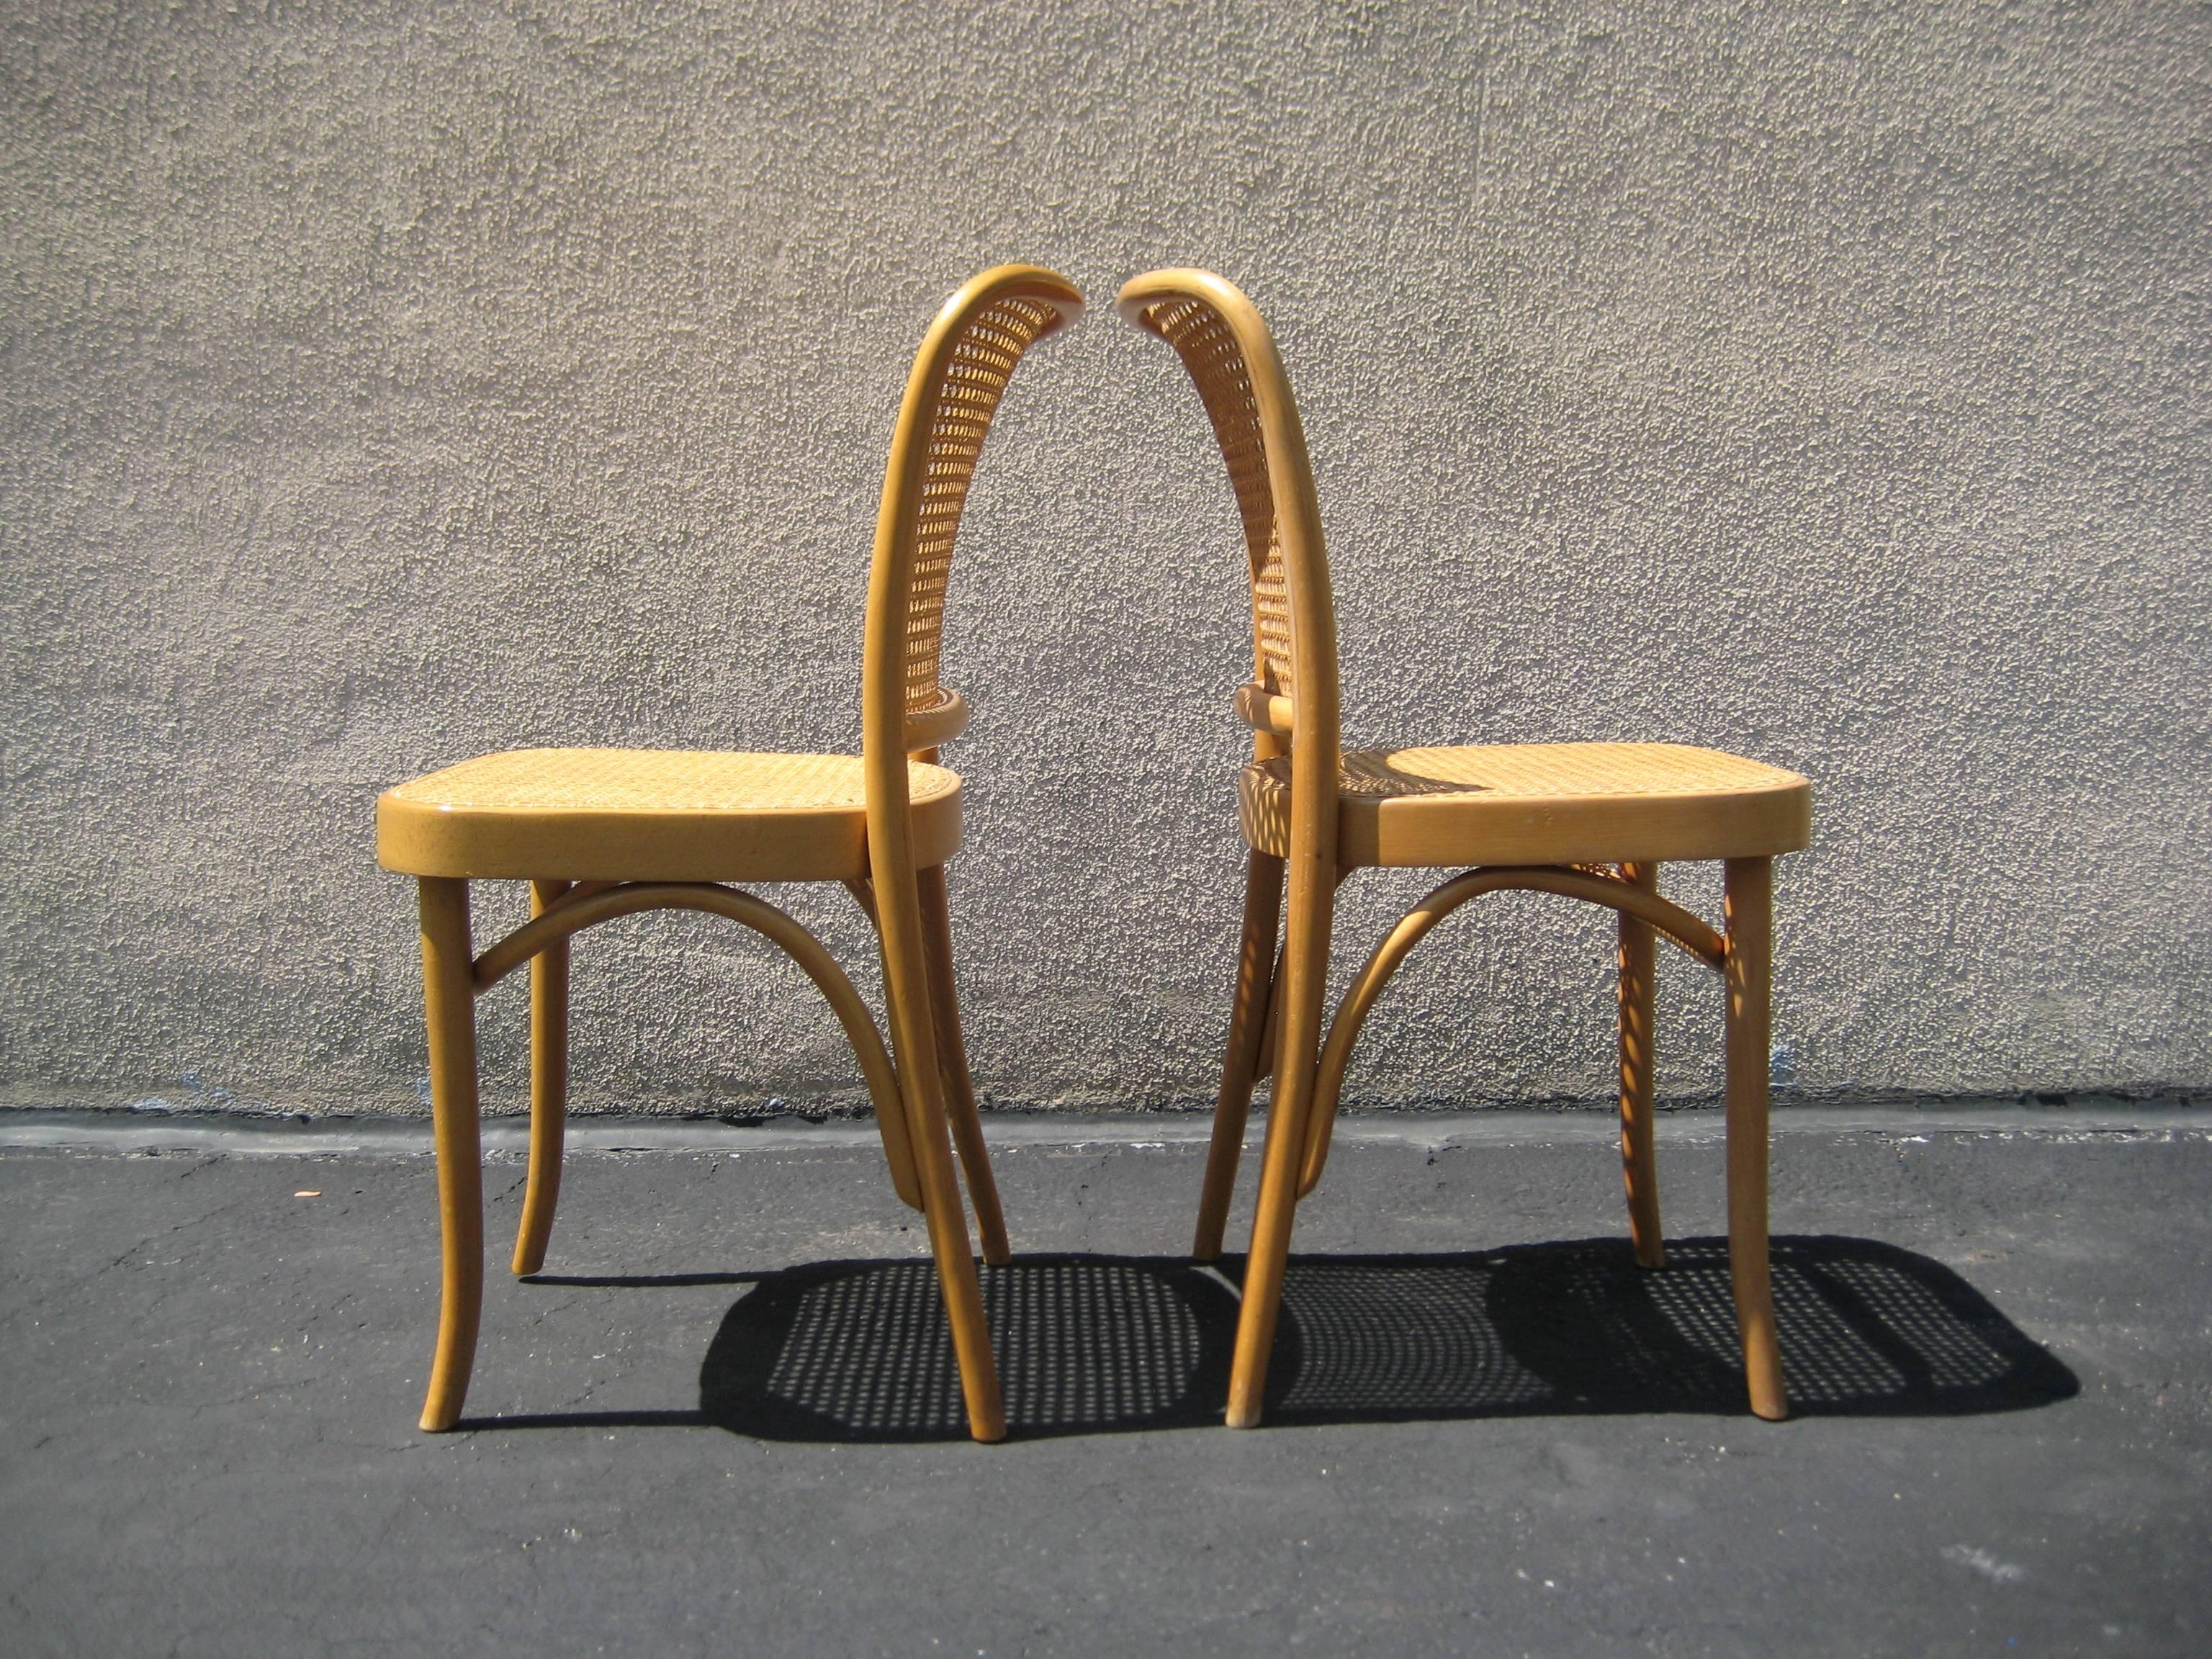 Antique pair of Josef Hoffmann cane bentwood side chairs. Made in Poland. Designed by Josef Hoffmann in 1920s.